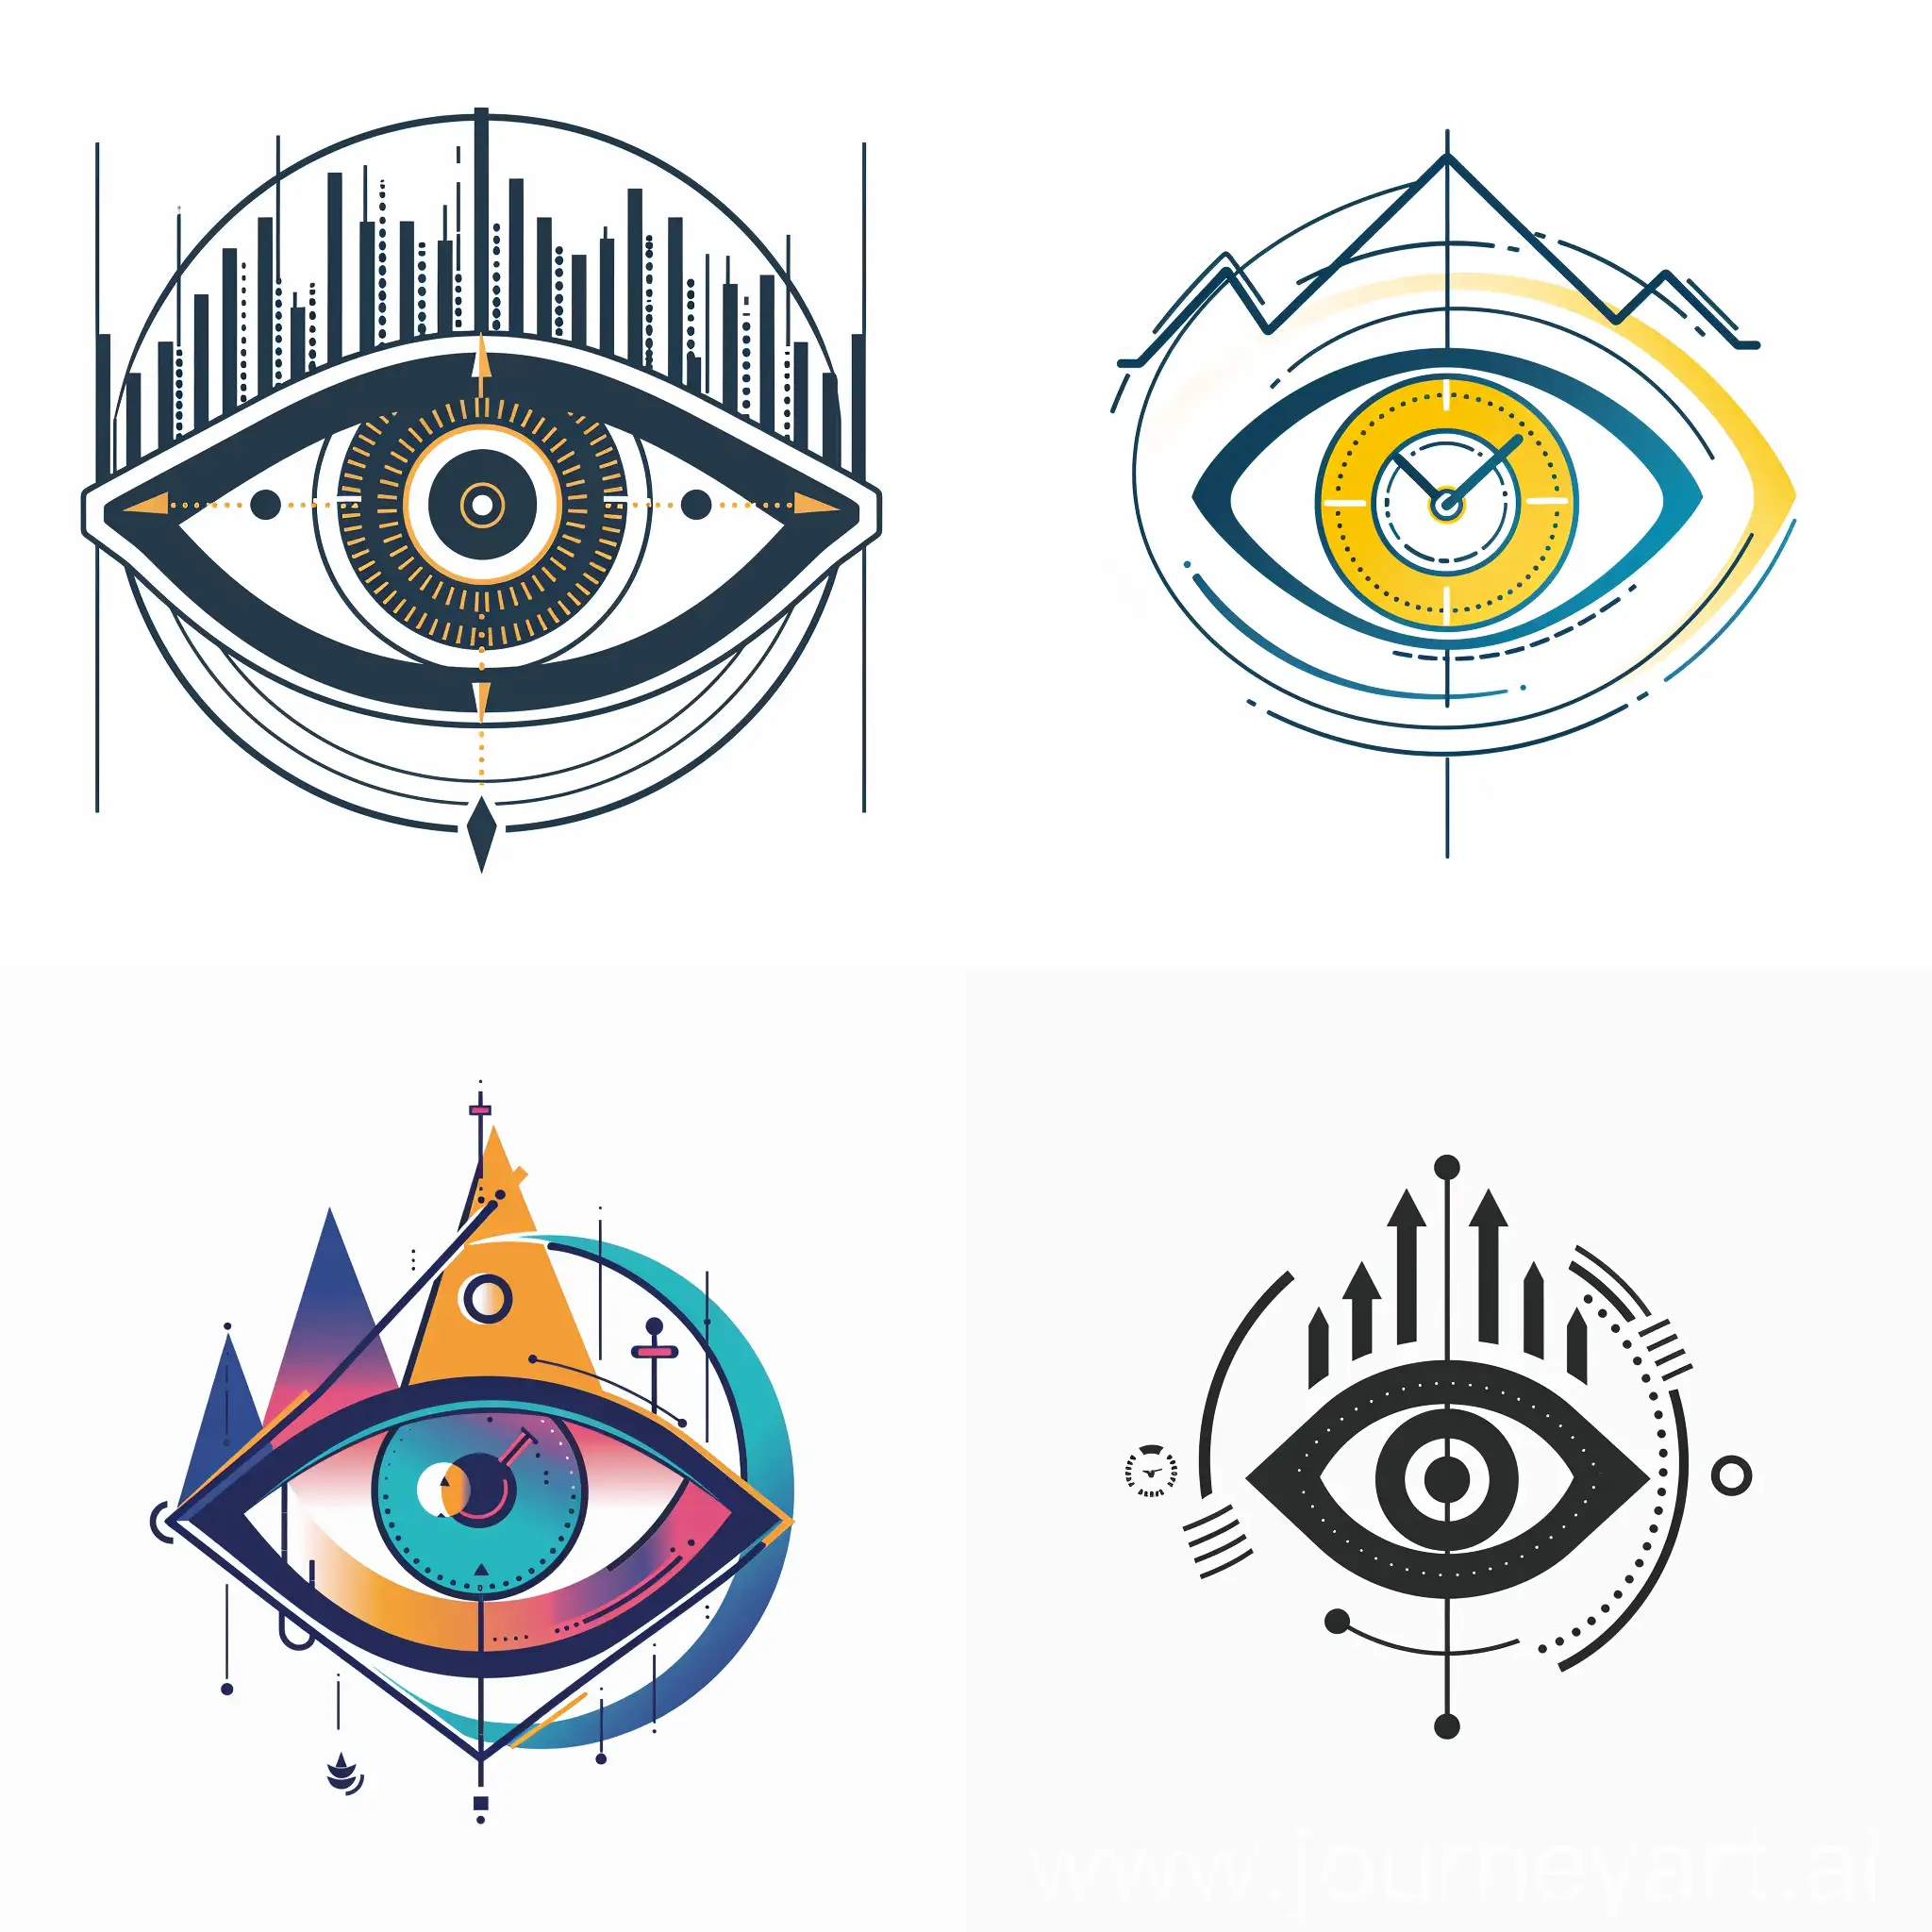 logo of a stylized eye symbolizing growth, with ascending line graph. representing a digital marketing agency, modern style. clock in the middle. Add Biblical prophecy vibe
